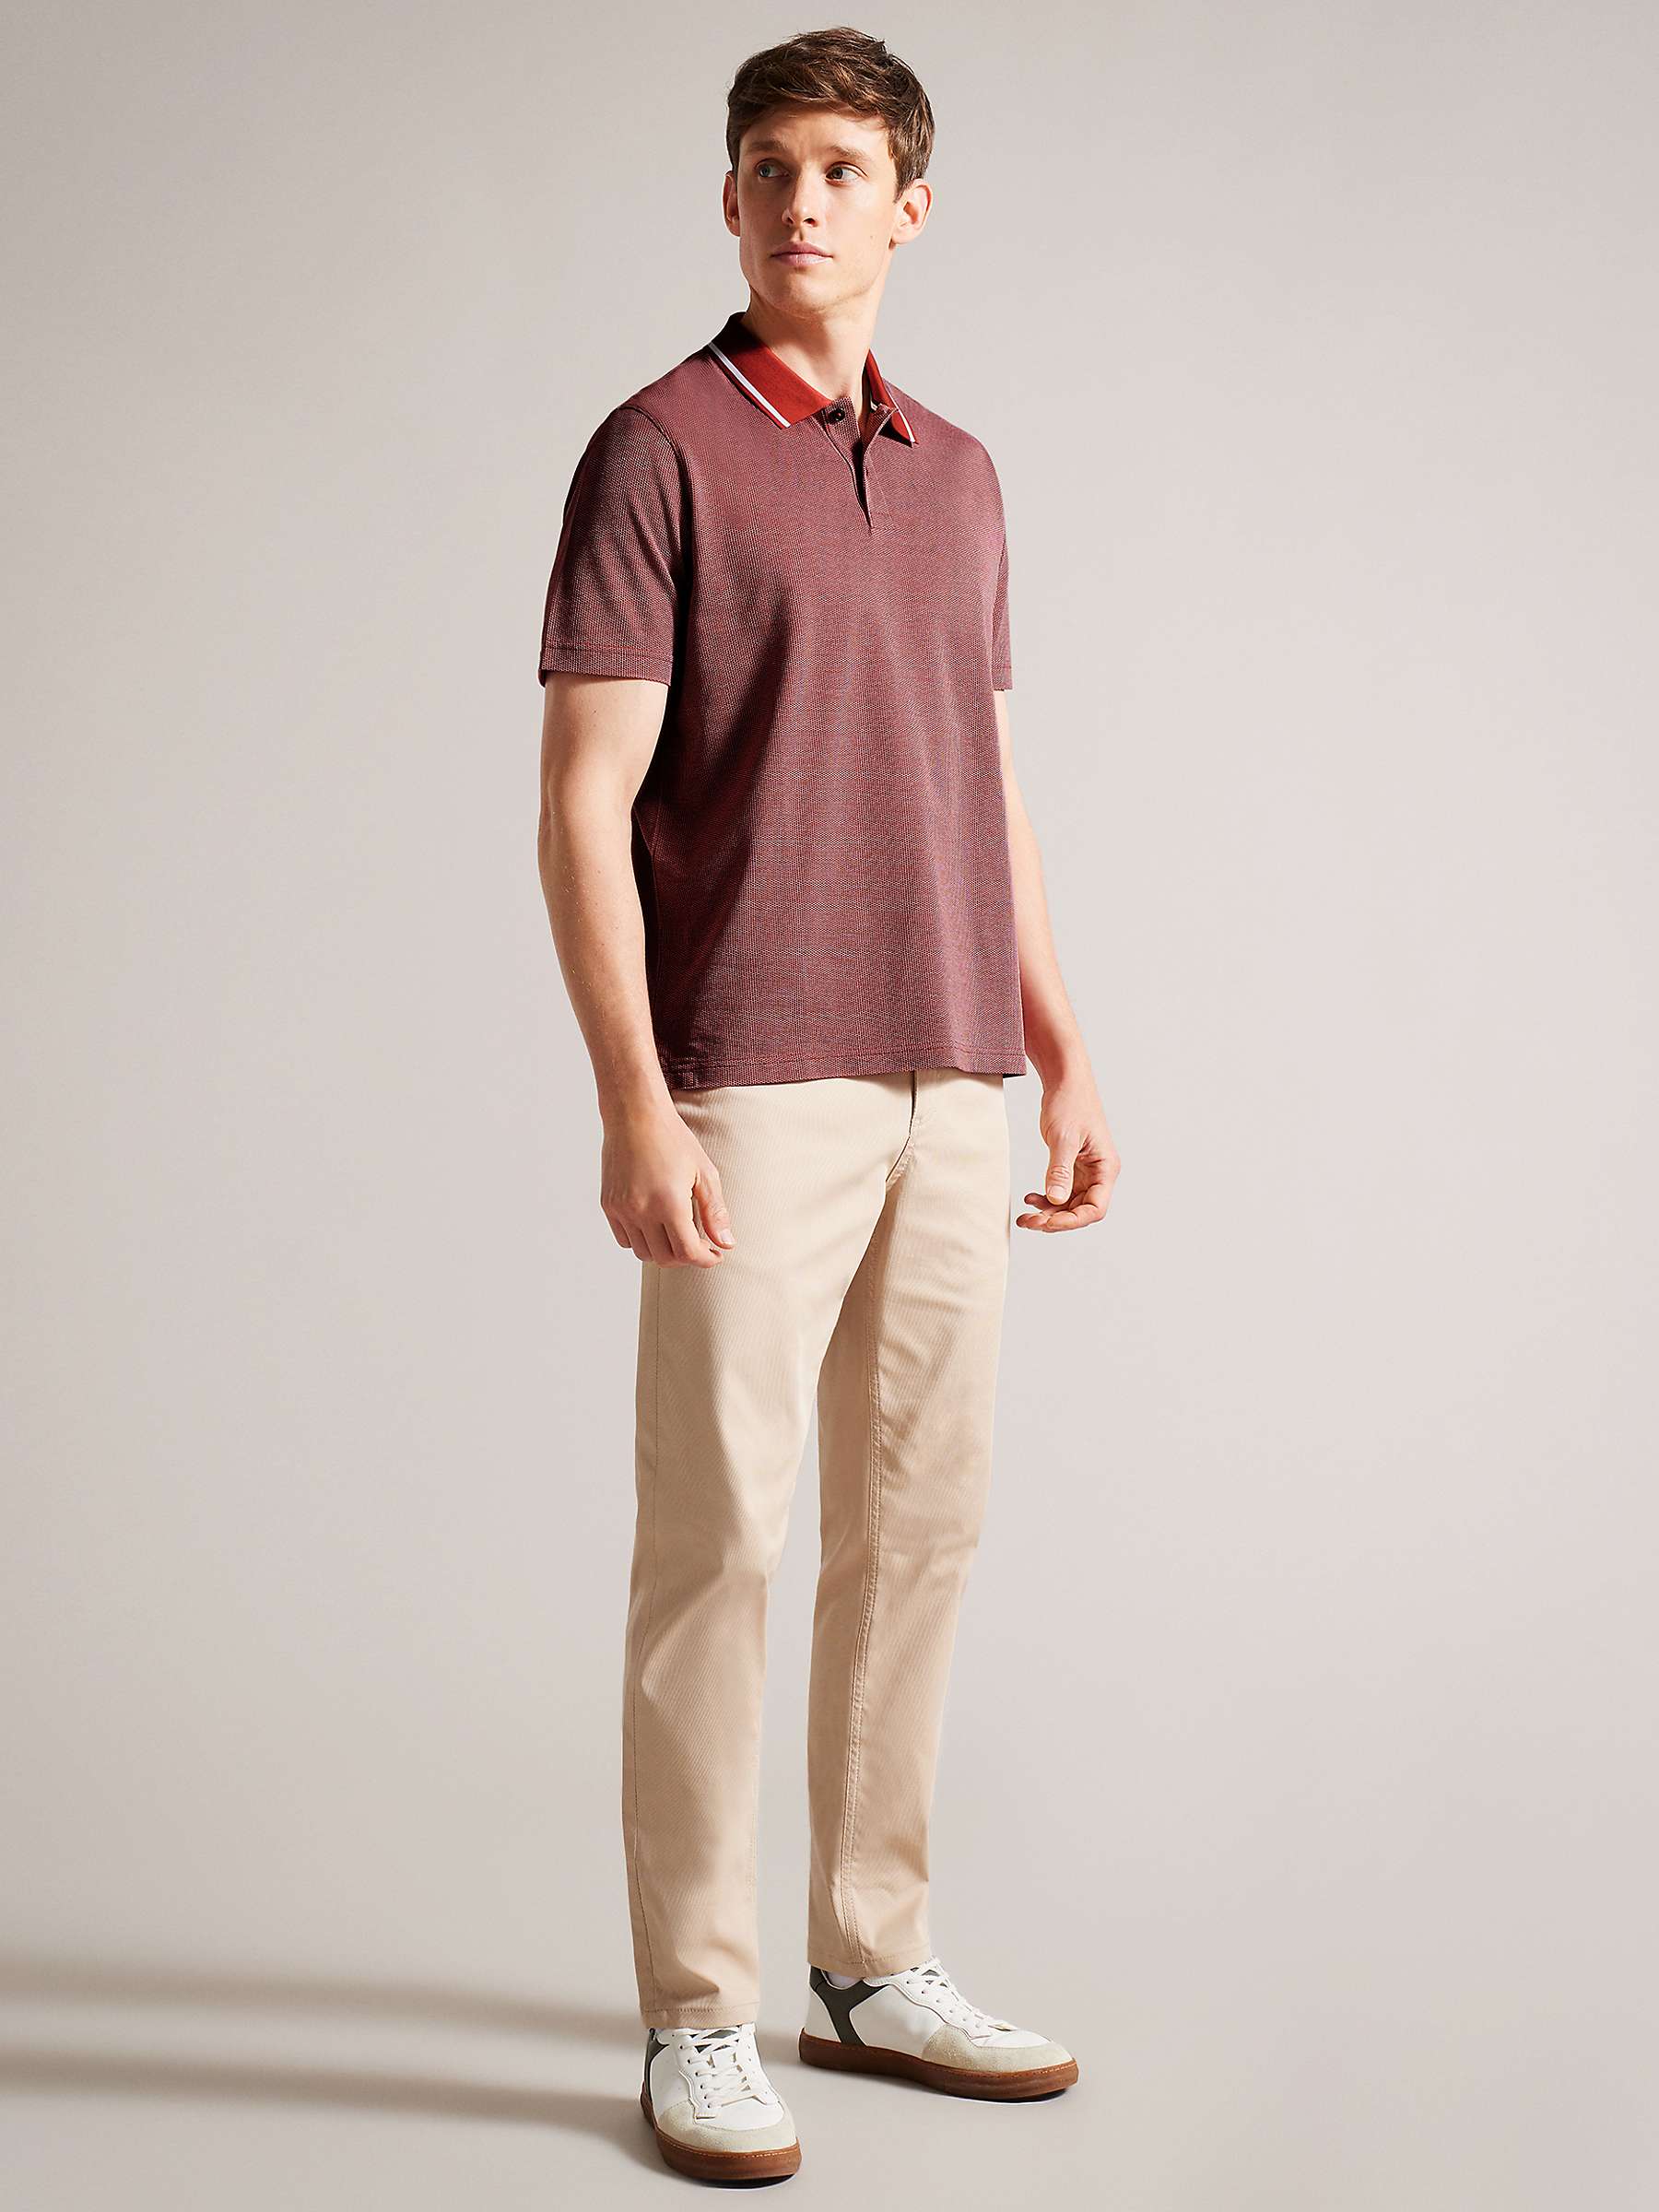 Buy Ted Baker Arts Mini Jacquard Stitch Polo, Red Dark Online at johnlewis.com